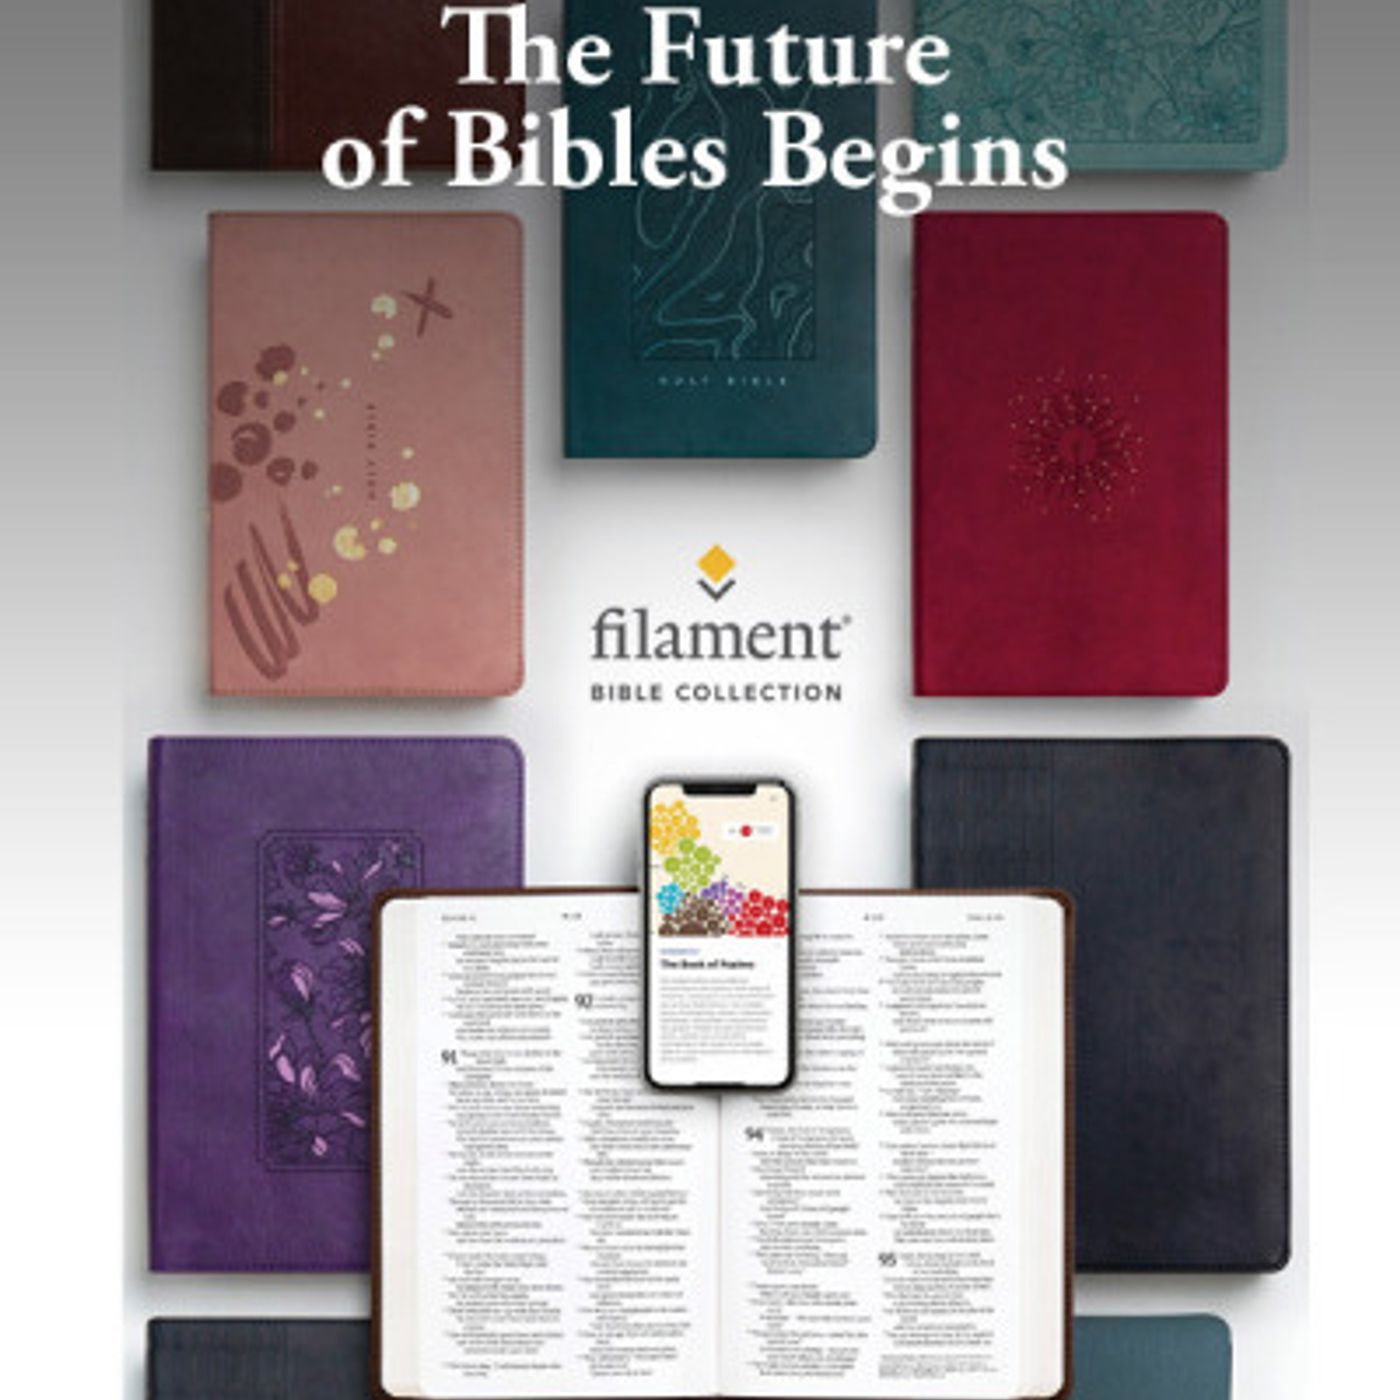 The Filament Bible and App: Unboxing and Activation